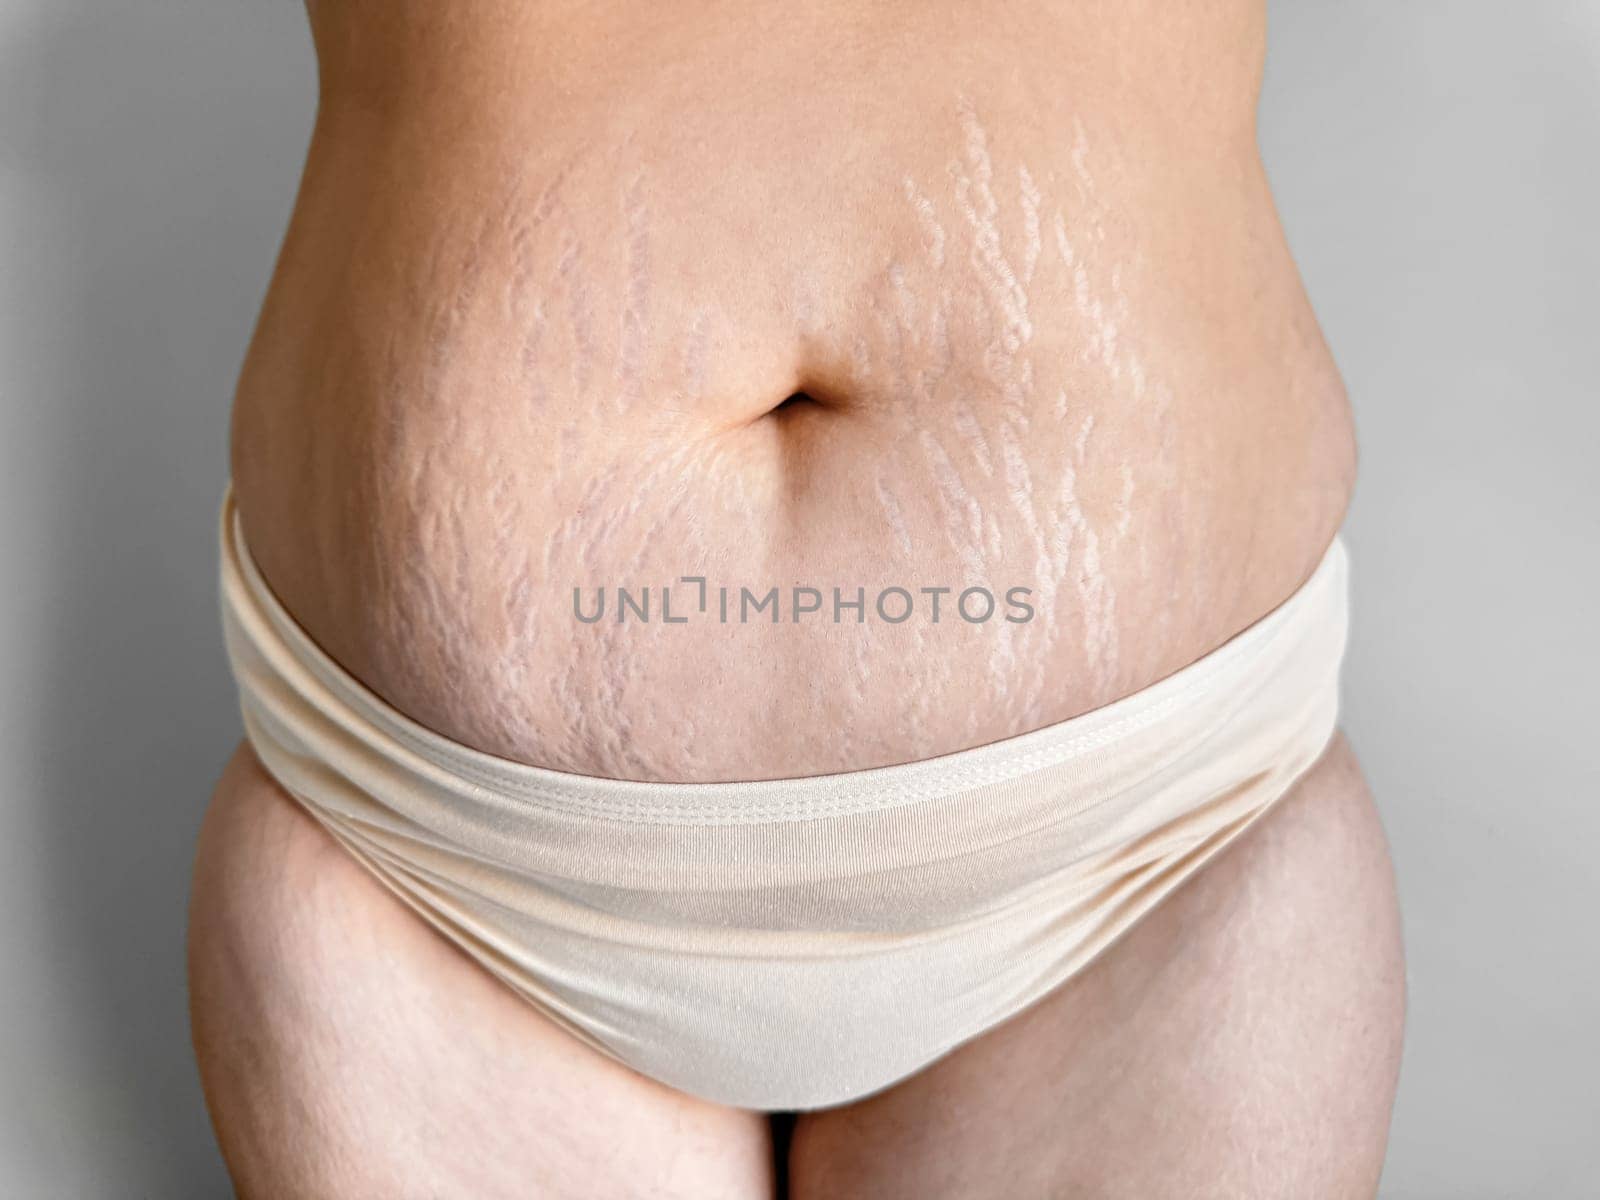 Womans midsection with stretch marks to celebrate real beauty, body positivity, and the natural changes after childbirth. The concept of self love and naturalness. by Lunnica